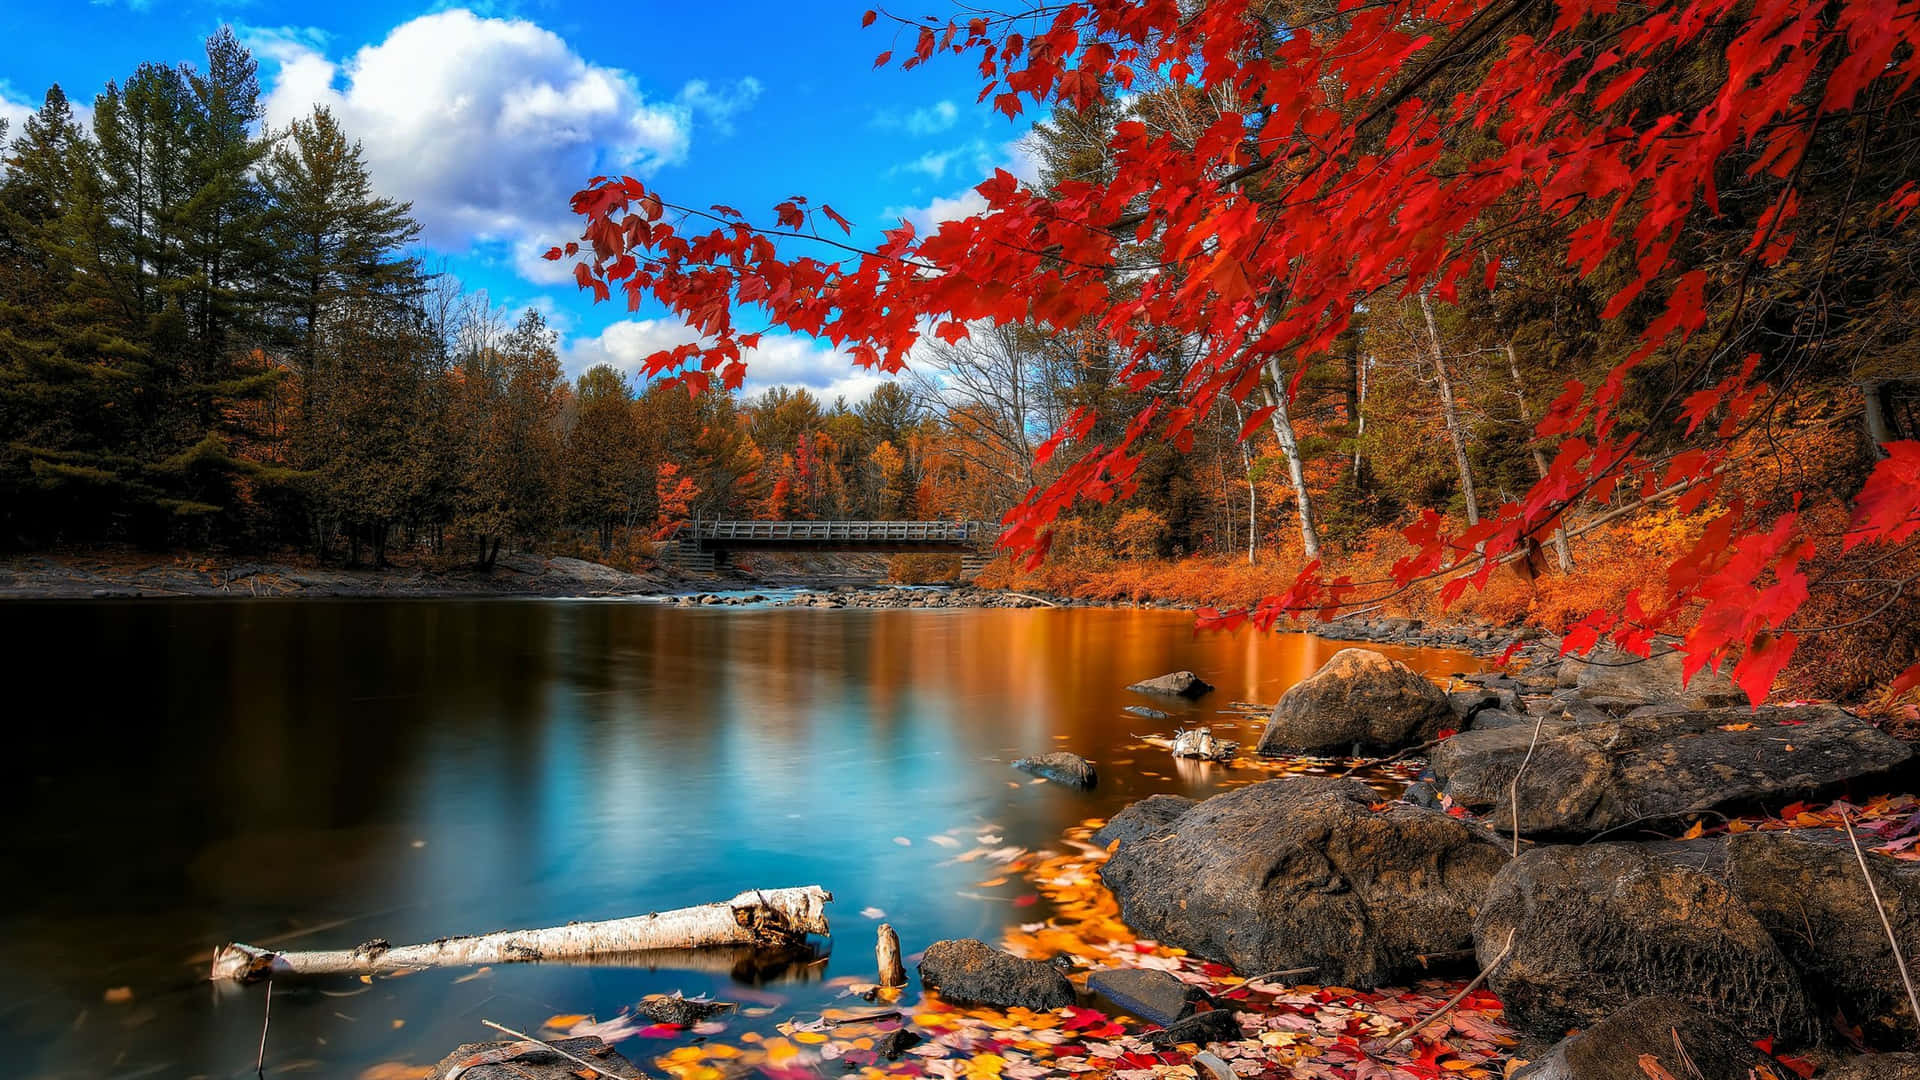 "Enjoy the Beauty of Fall with this Stunning Desktop Background" Wallpaper